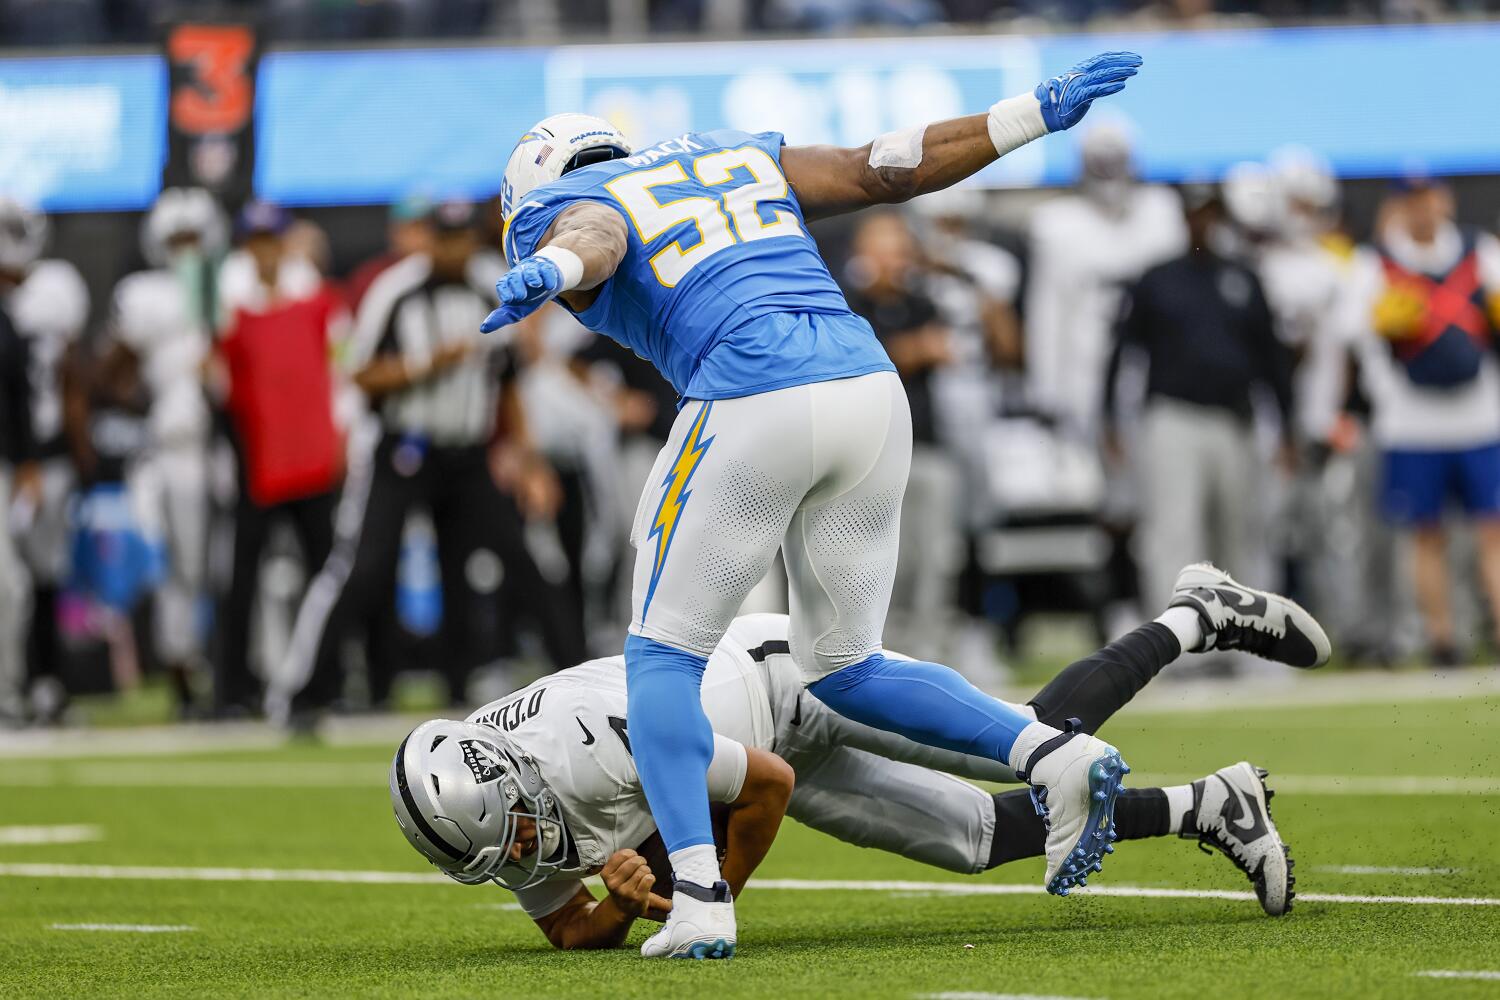 Asante Samuel Jr.'s clutch pick and Khalil Mack's six sacks save Chargers in win